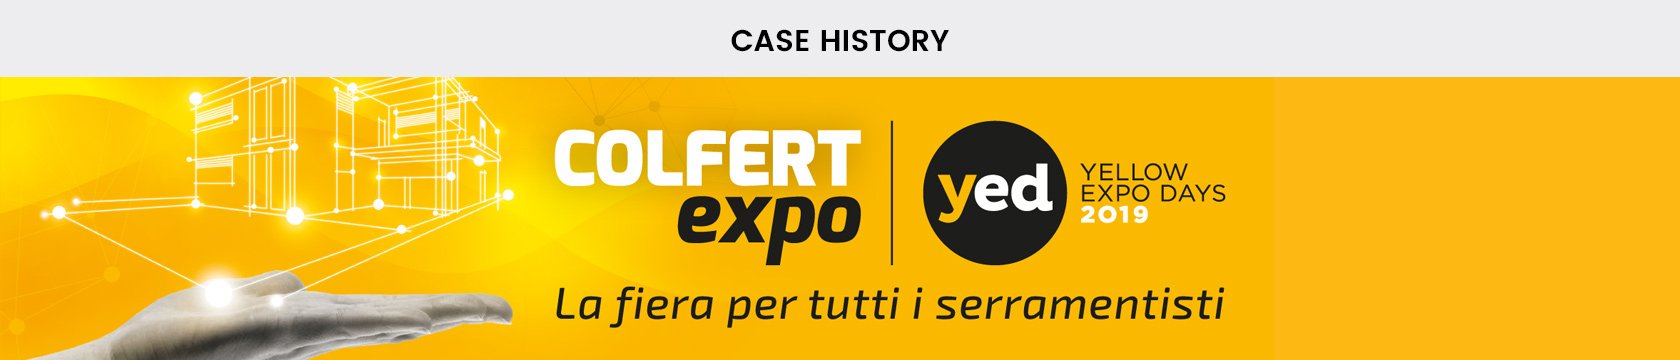 Clappit-Eventi-Aziendali-Business-B2B-Case-History-Colfert--YED-Yellow-Expo-Days-Top-002